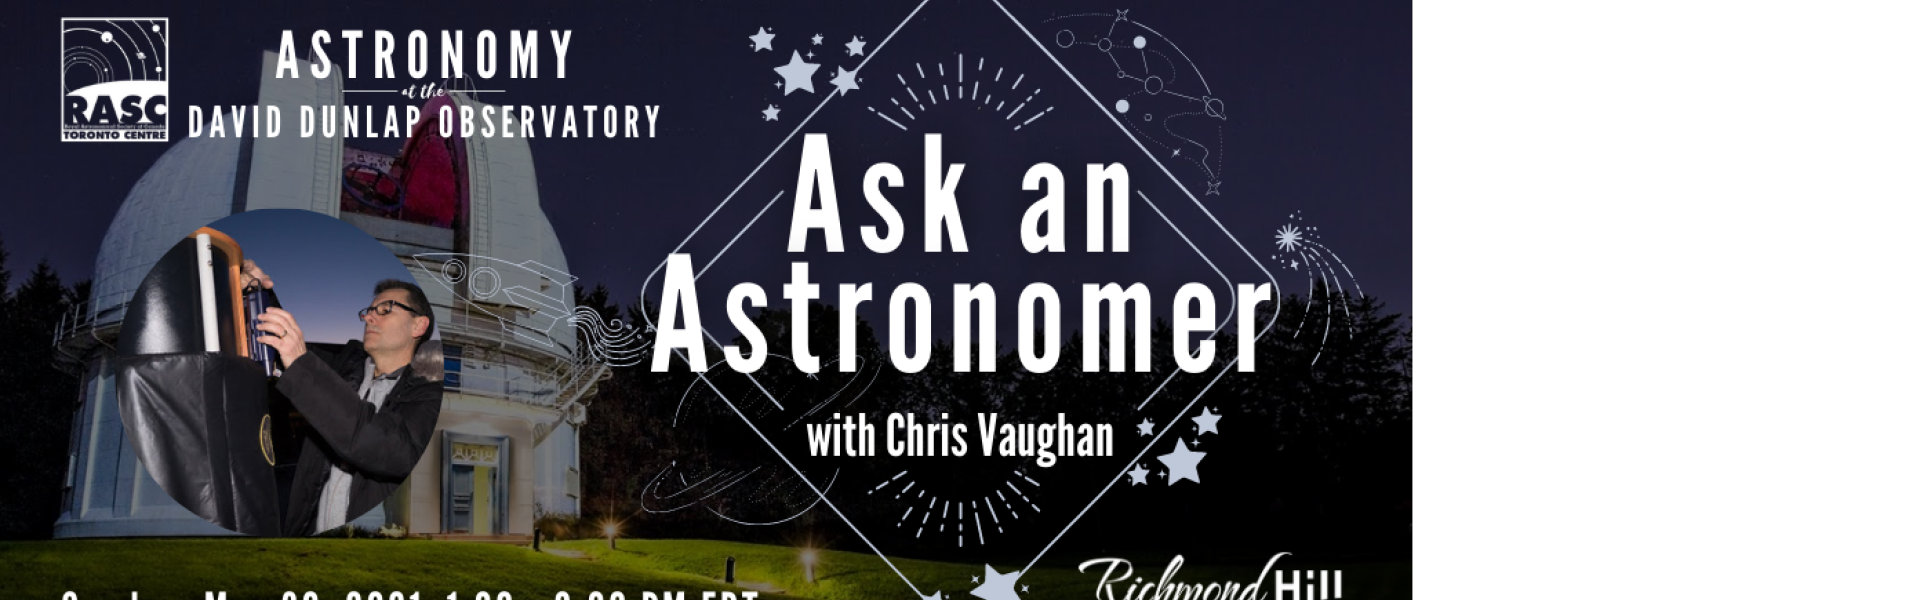 Ask an Astronomer May 30